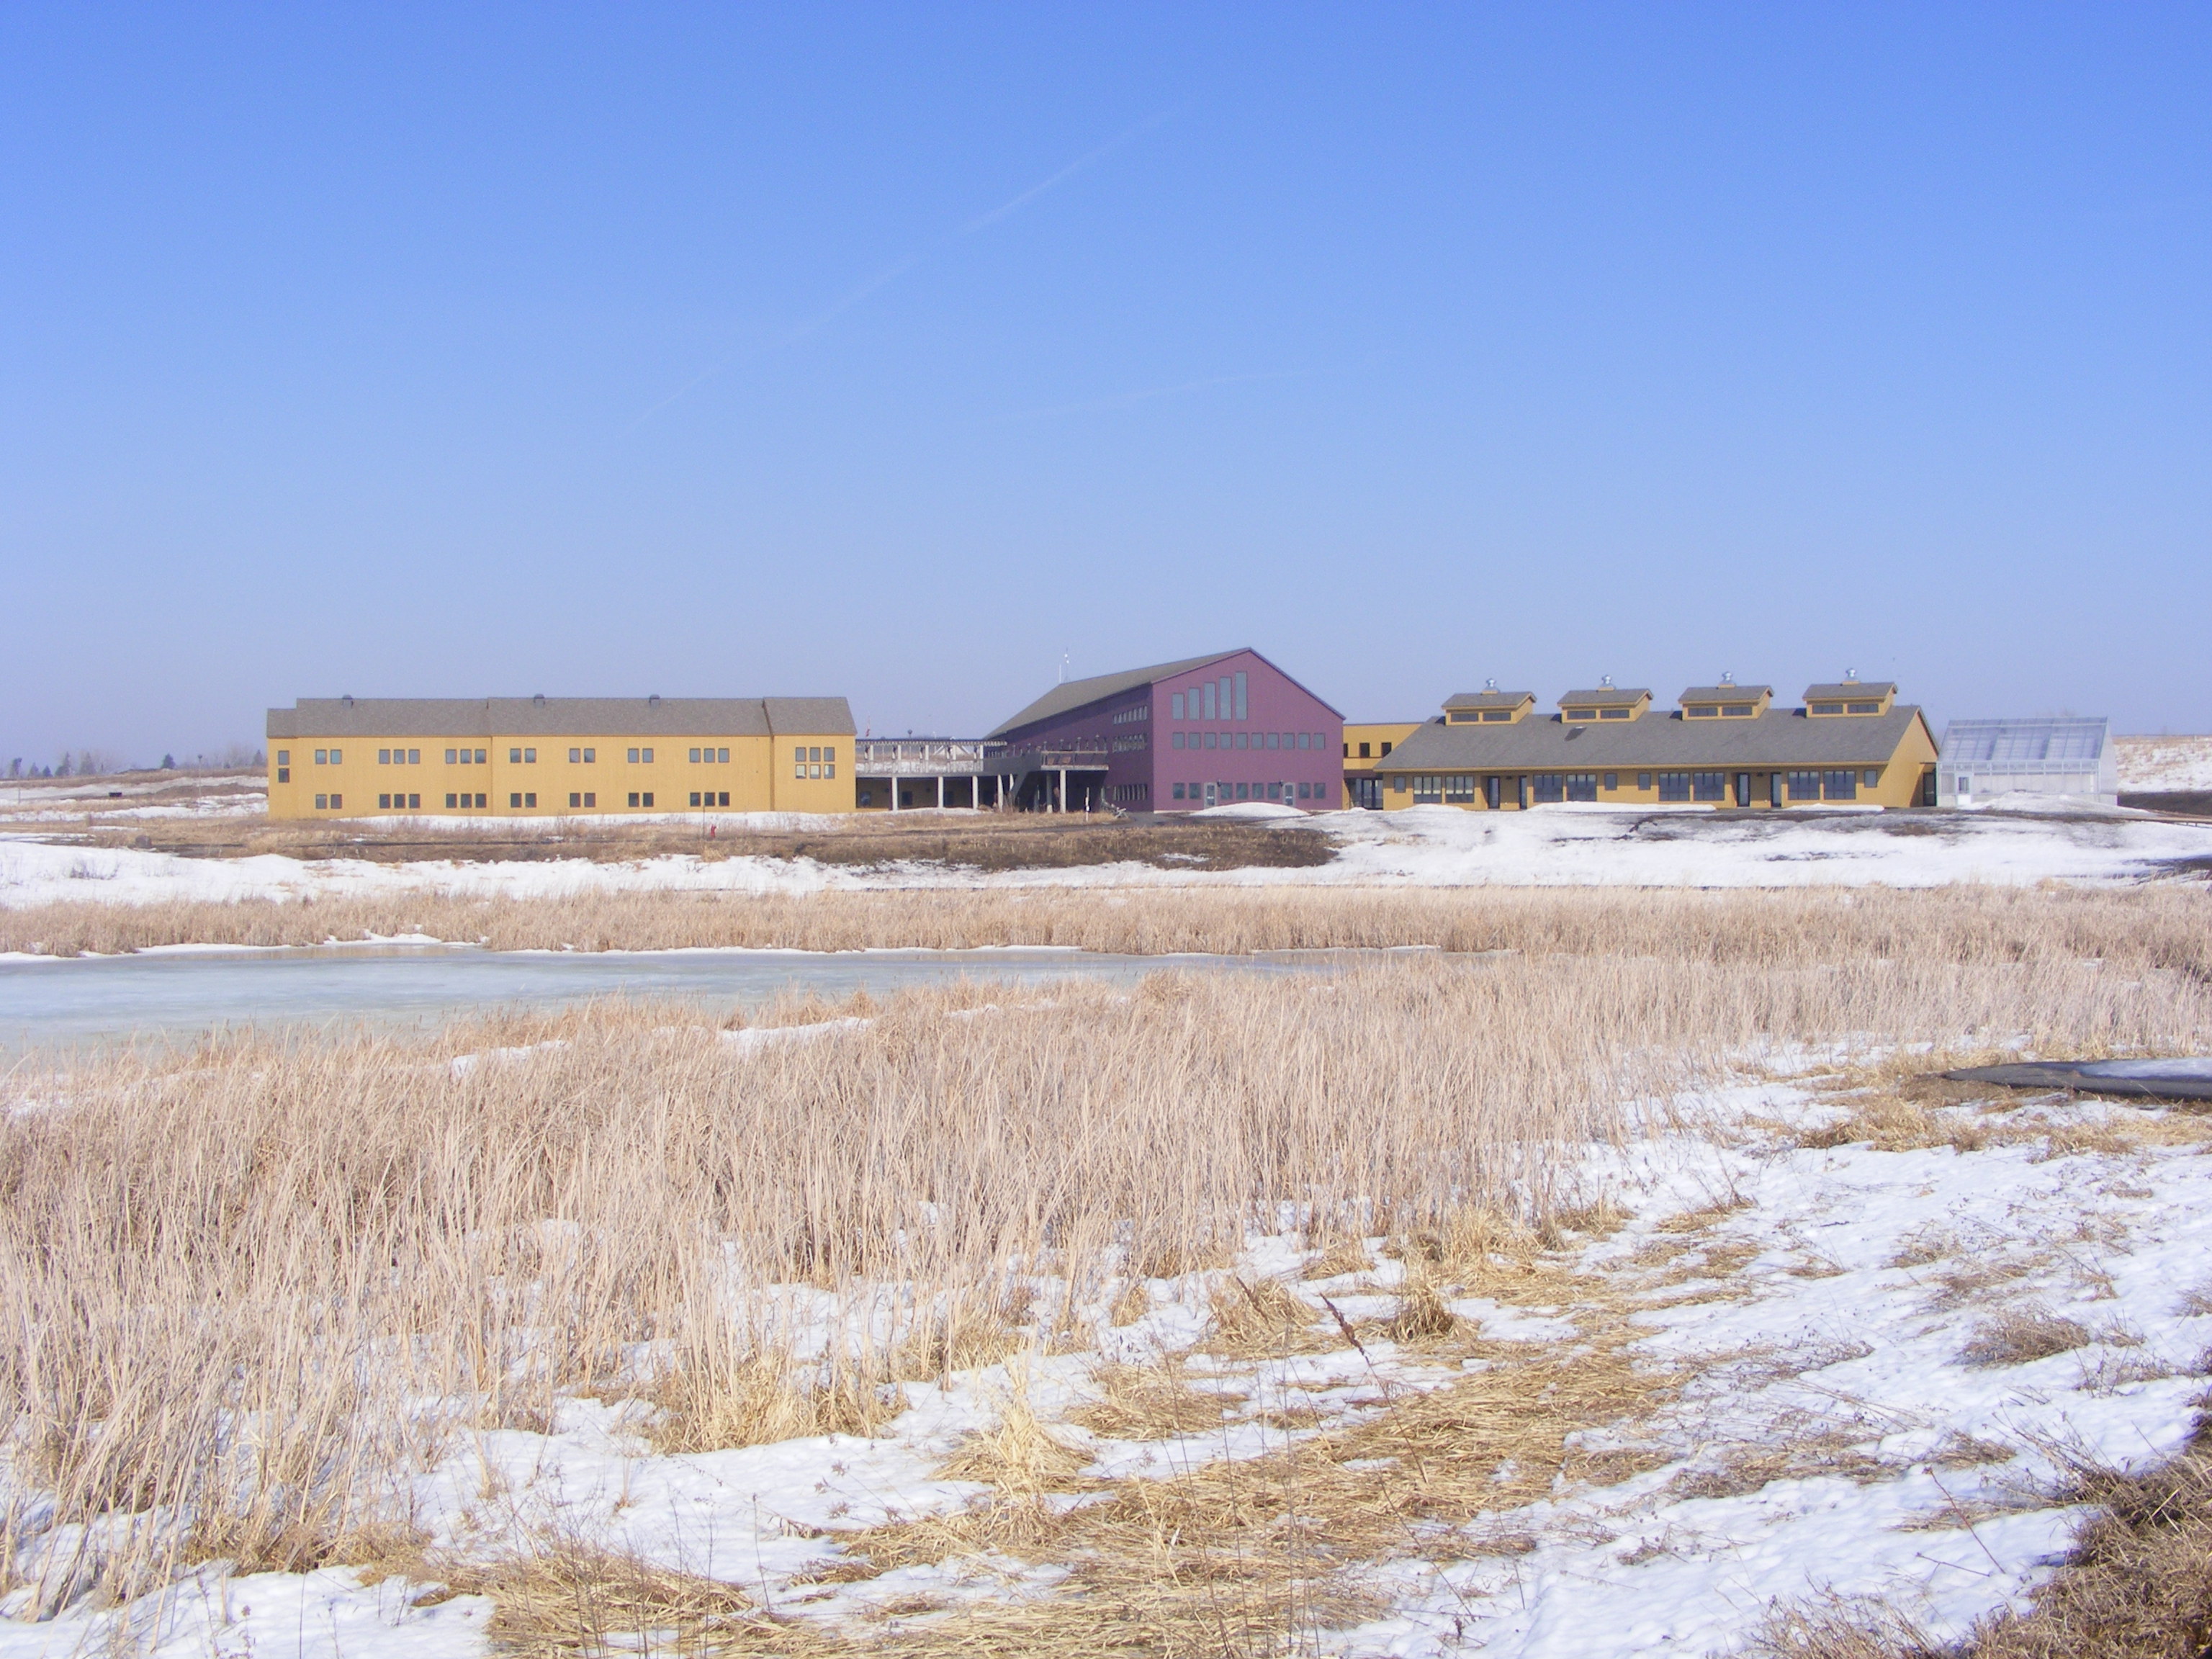 The Prairie Wetlands Learning Center buildings on the horizon below a sunny blue sky and above the snowy, tan prairie